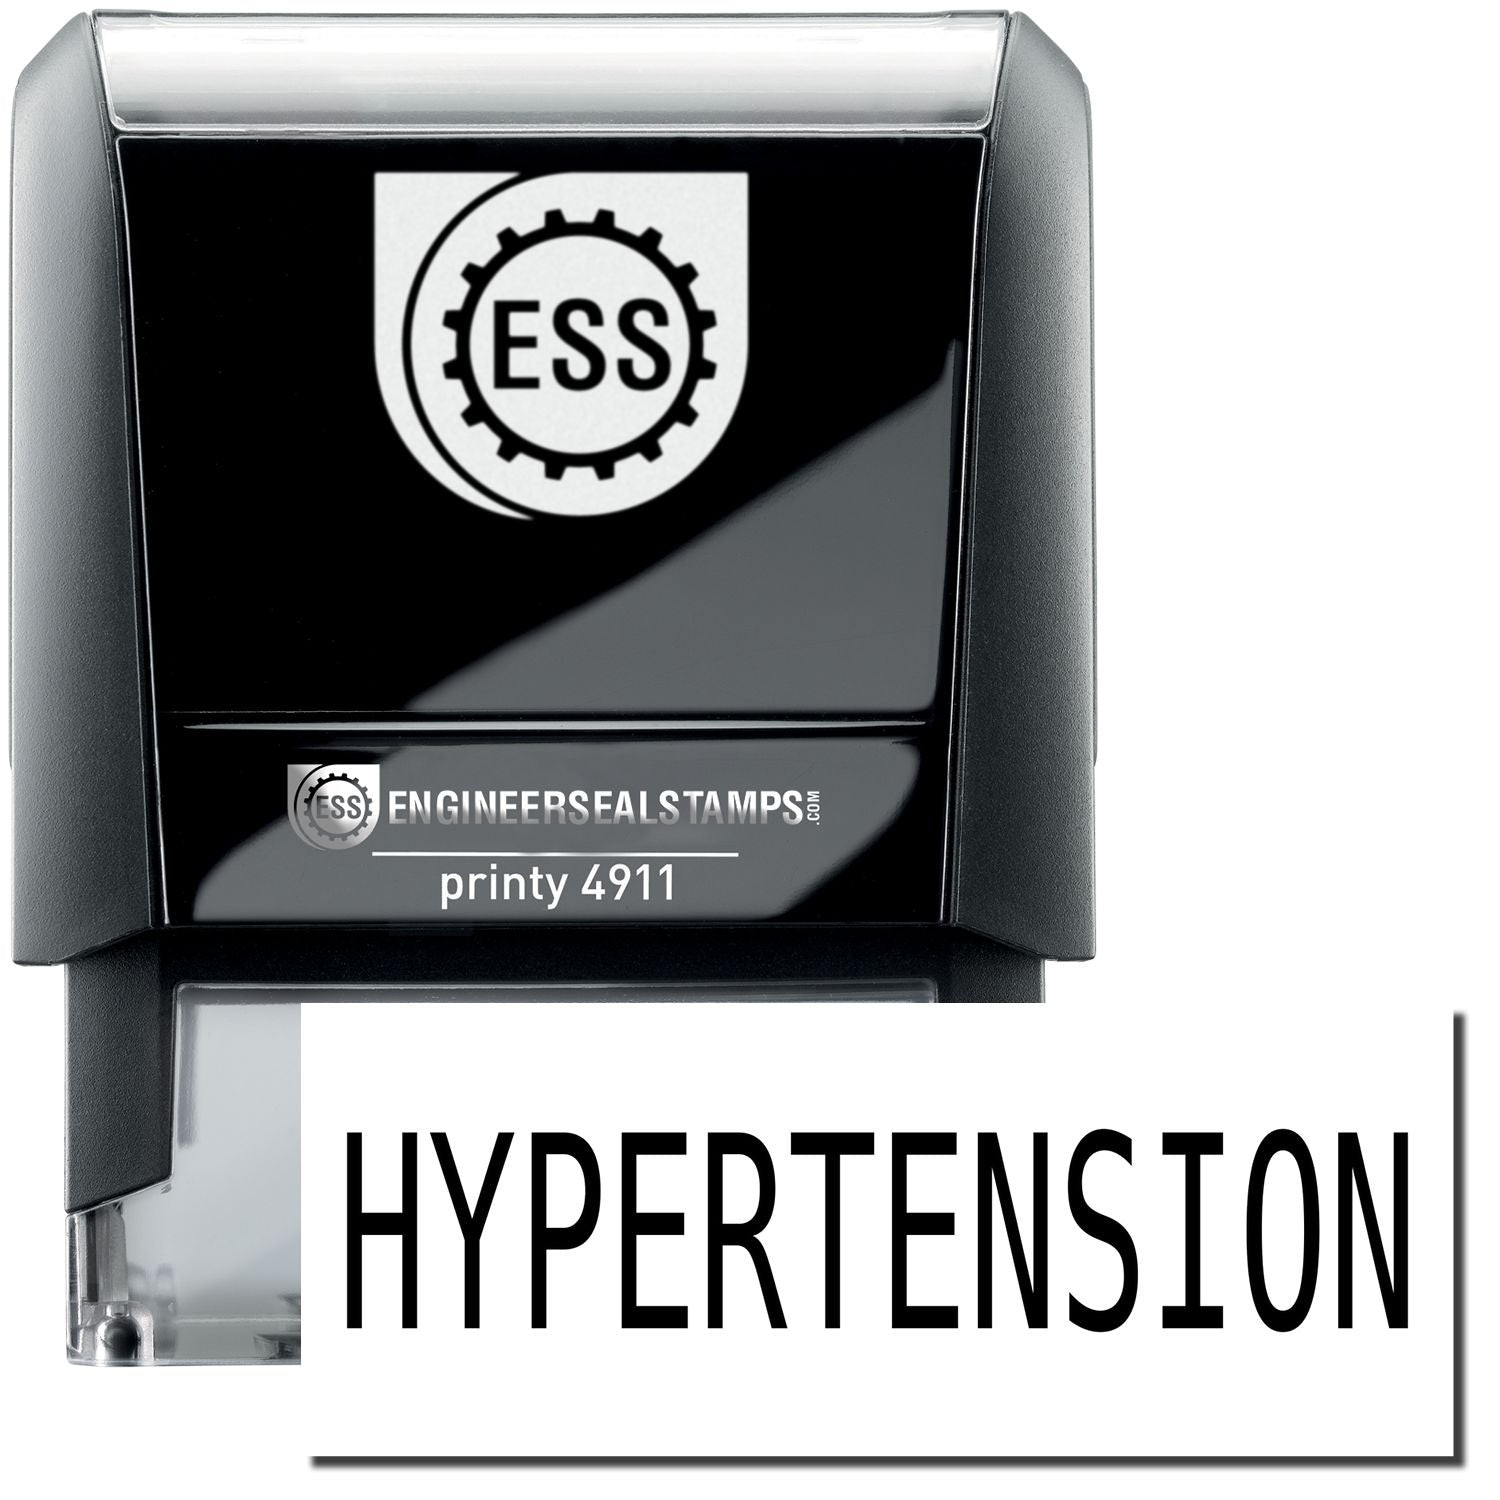 A self-inking stamp with a stamped image showing how the text "HYPERTENSION" is displayed after stamping.